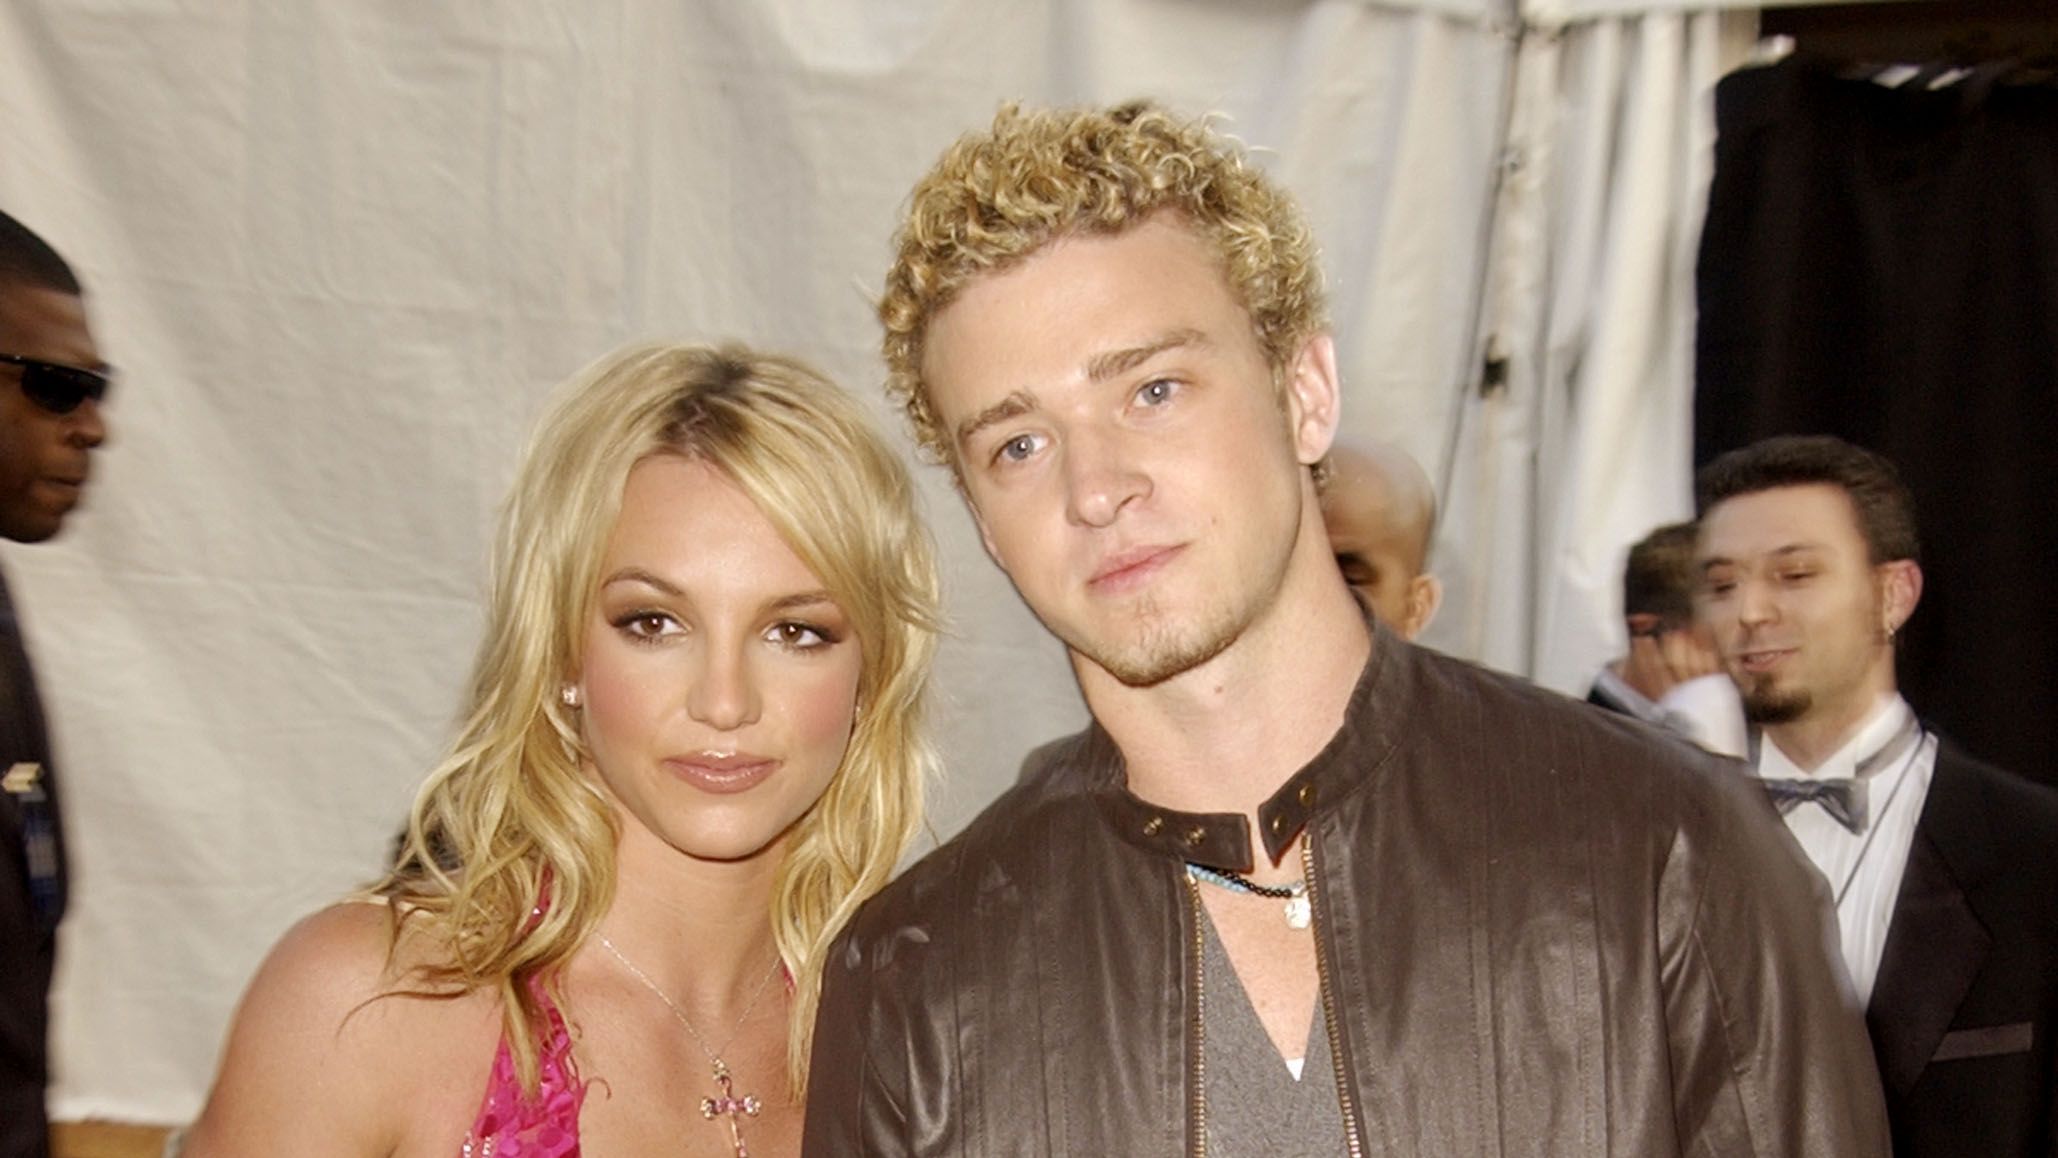 Justin Timberlake Reacts to Britney Spears' Pregnancy With Sam